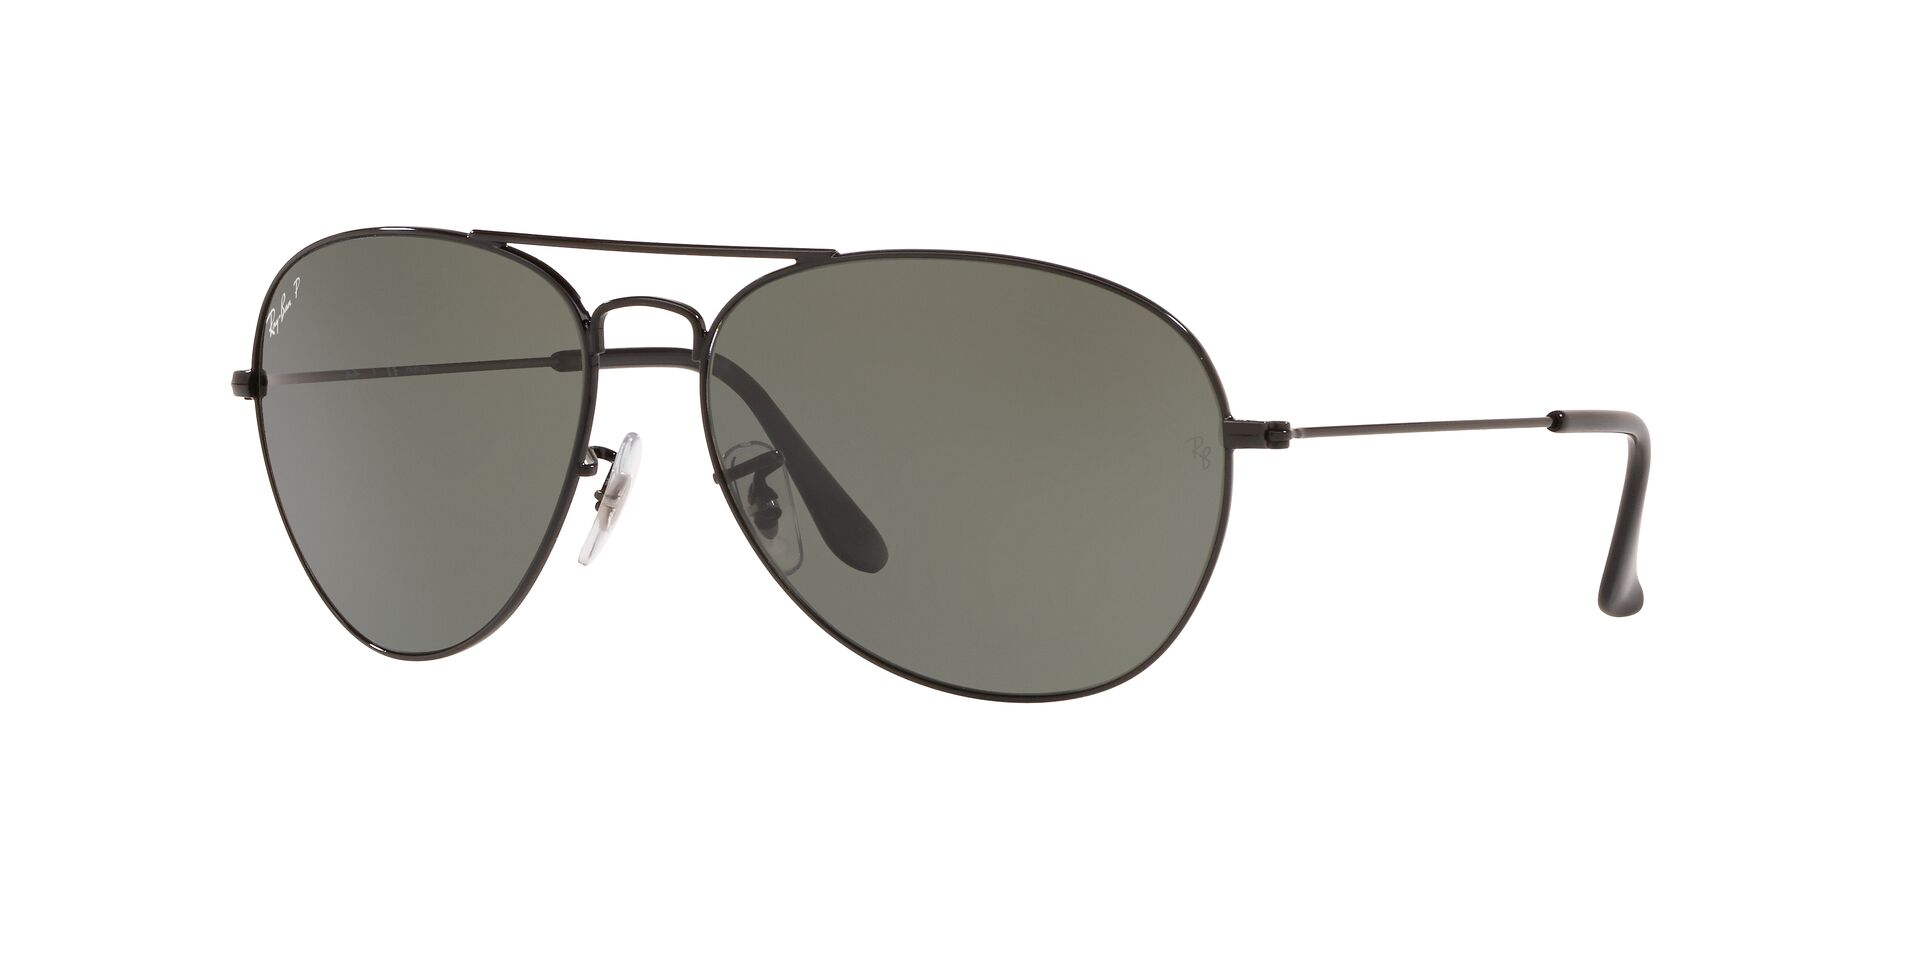 Buy Ray-Ban Rb3342 Sunglasses Online.